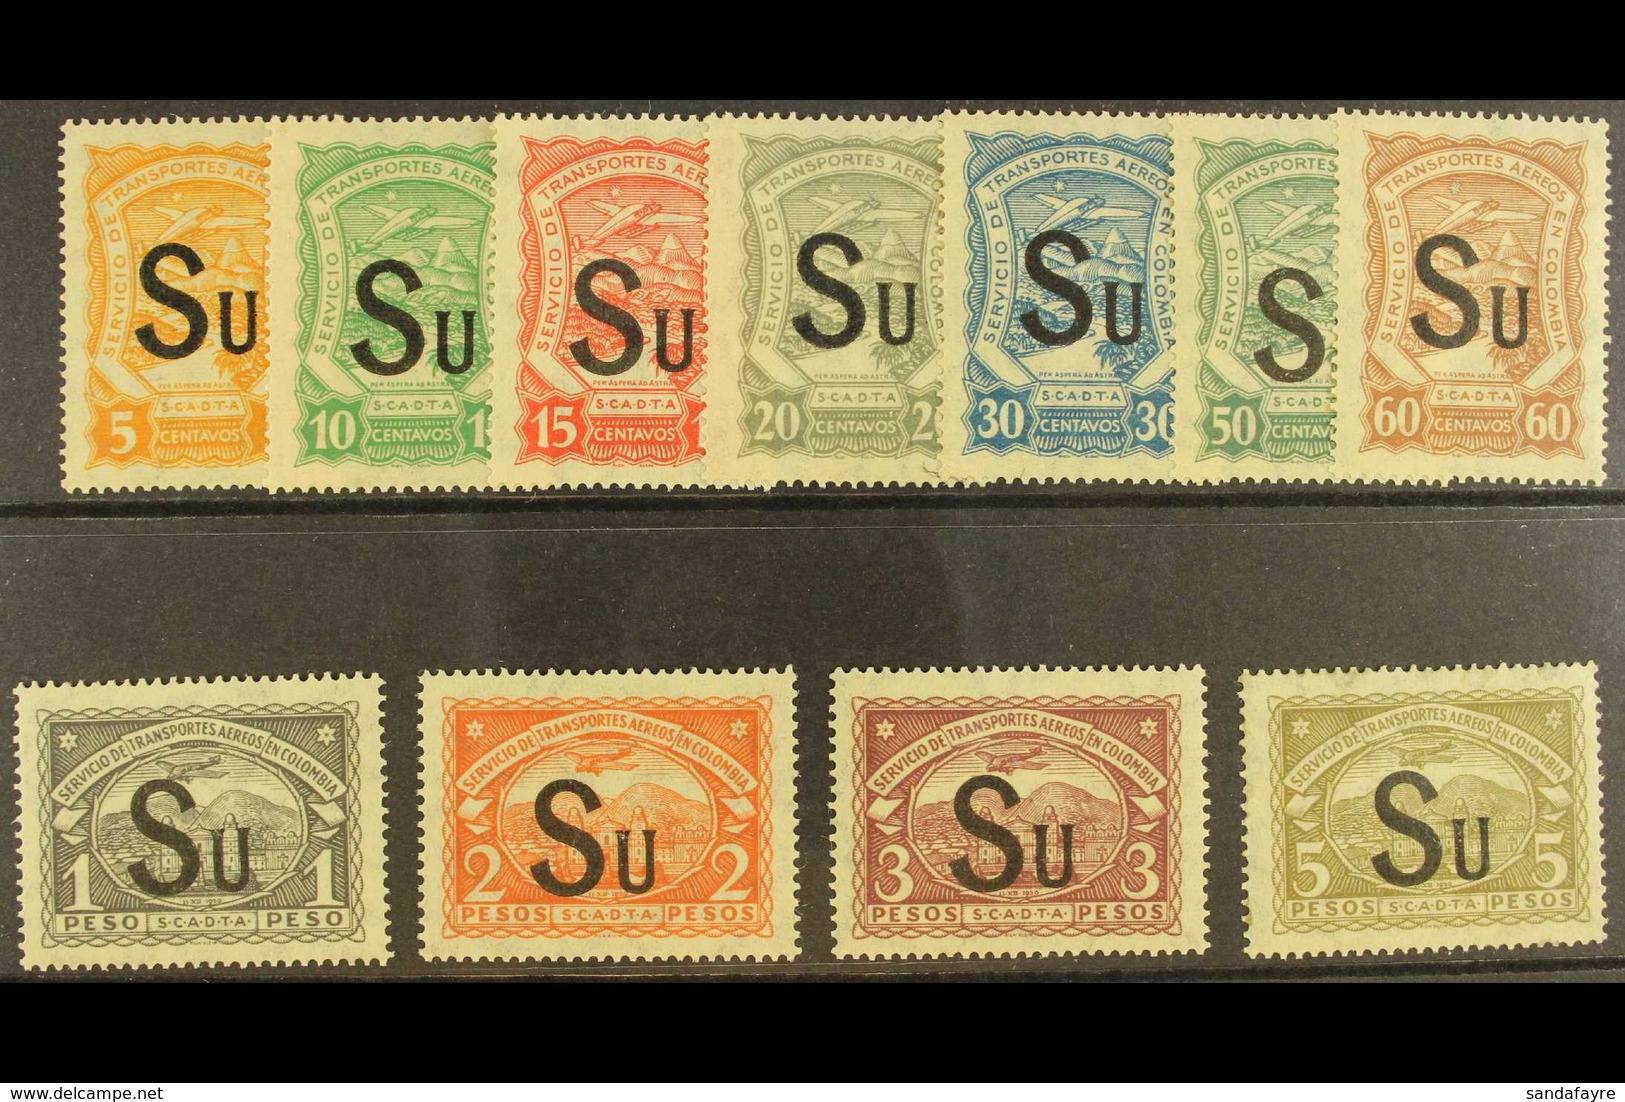 PRIVATE AIRS - SCADTA  1924 (10 Mar) "SU" Overprinted (for Sweden) Complete Set (SG 26M/36M, Scott CLSU1/11), Very Fine  - Colombia